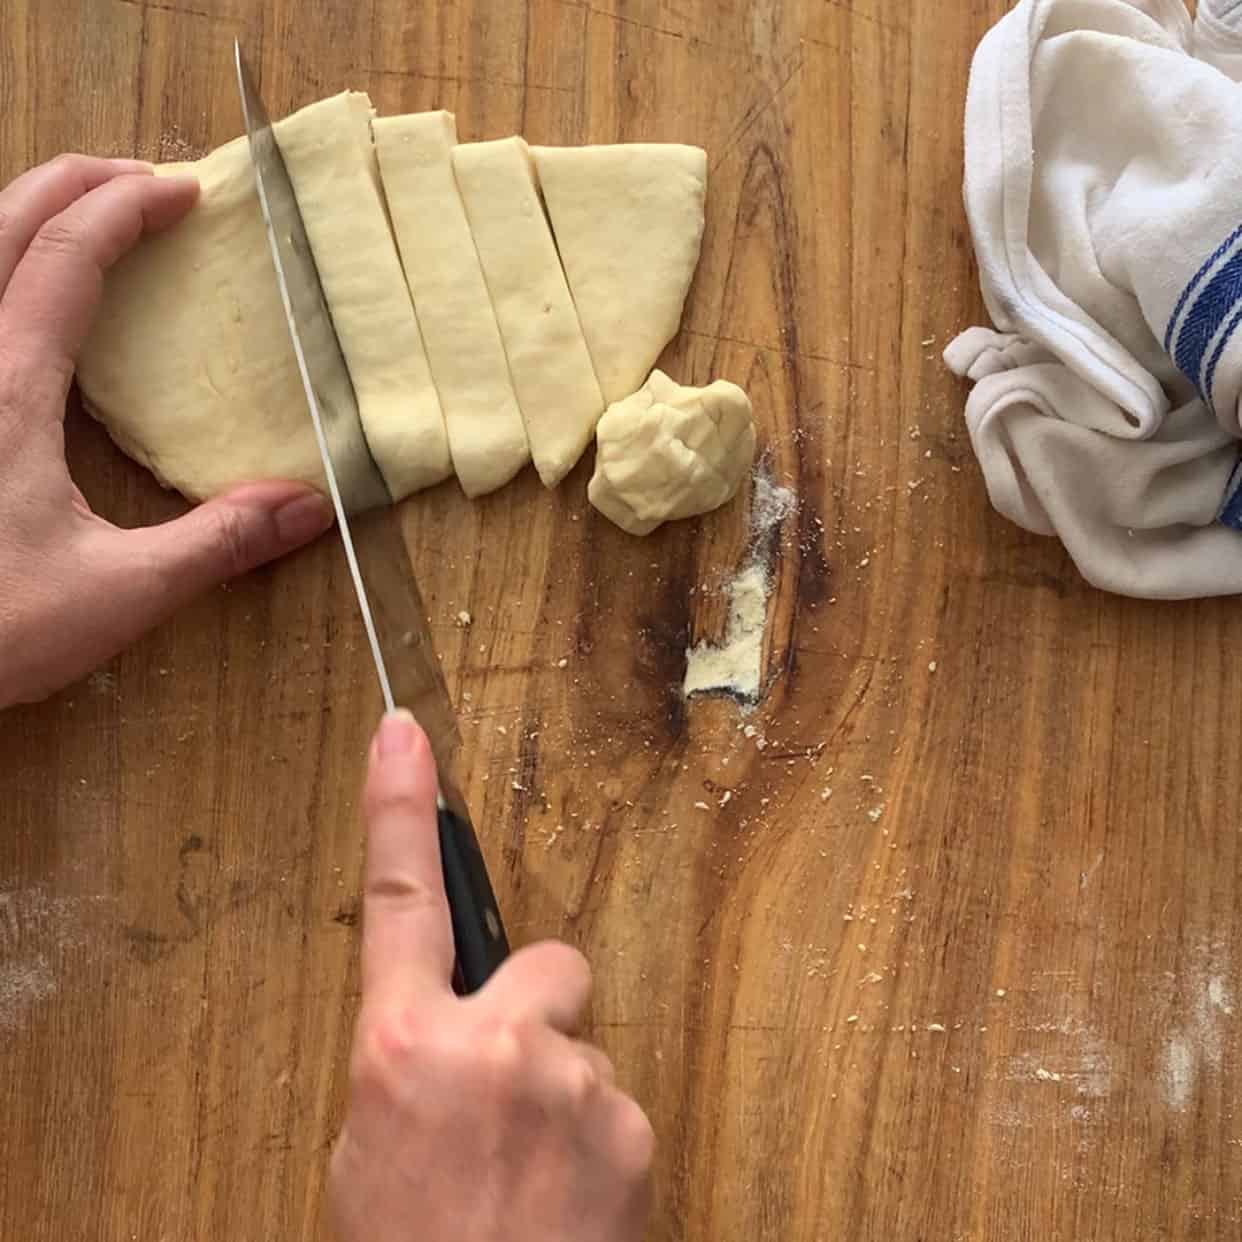 slicing pasta dough on wooden board